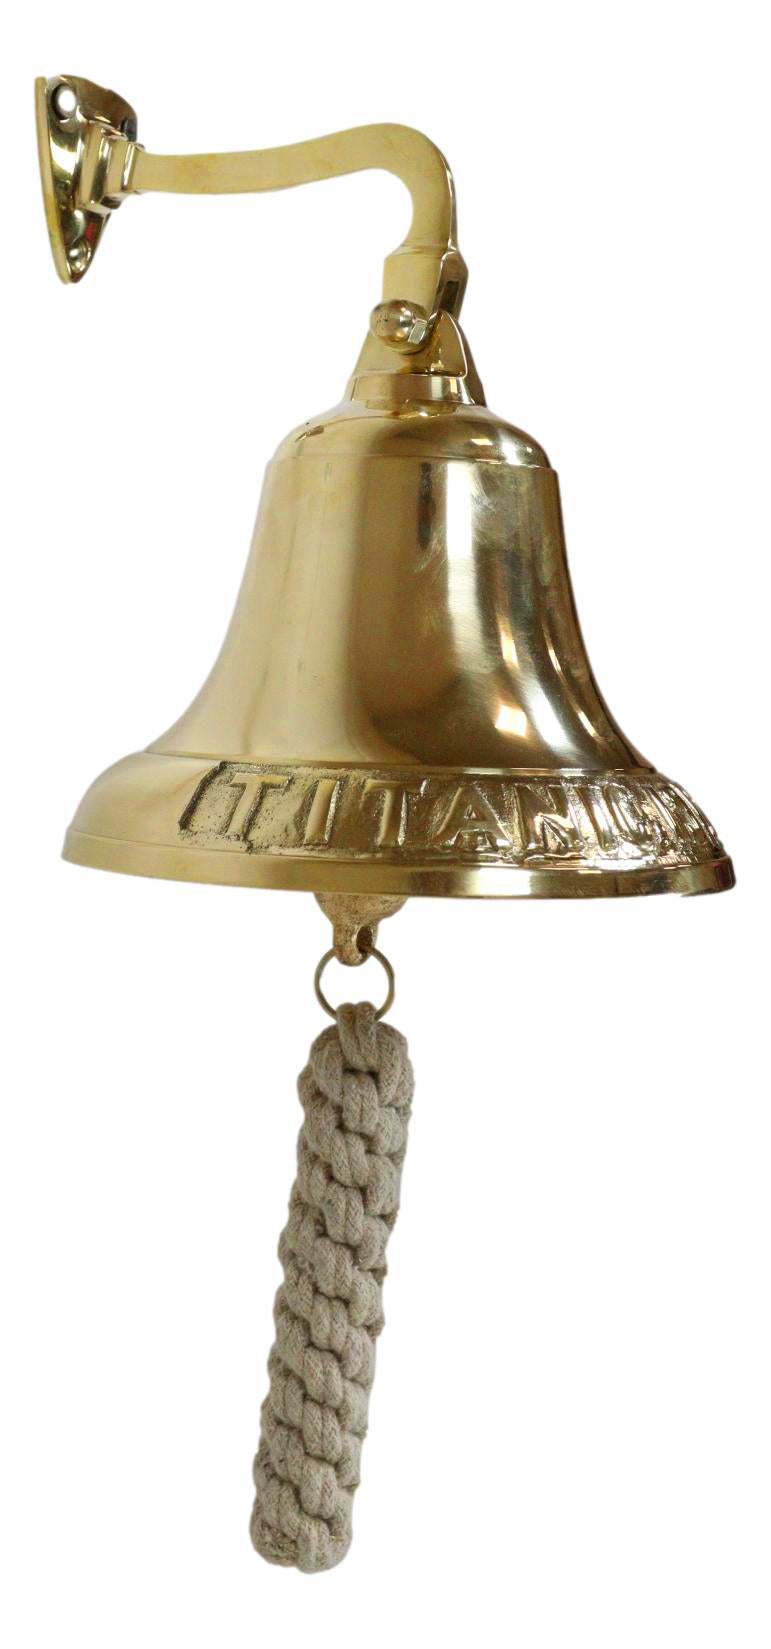 Marine Antiqued Solid Polished Brass RMS Titanic Wall Dinner Bell With Lanyard